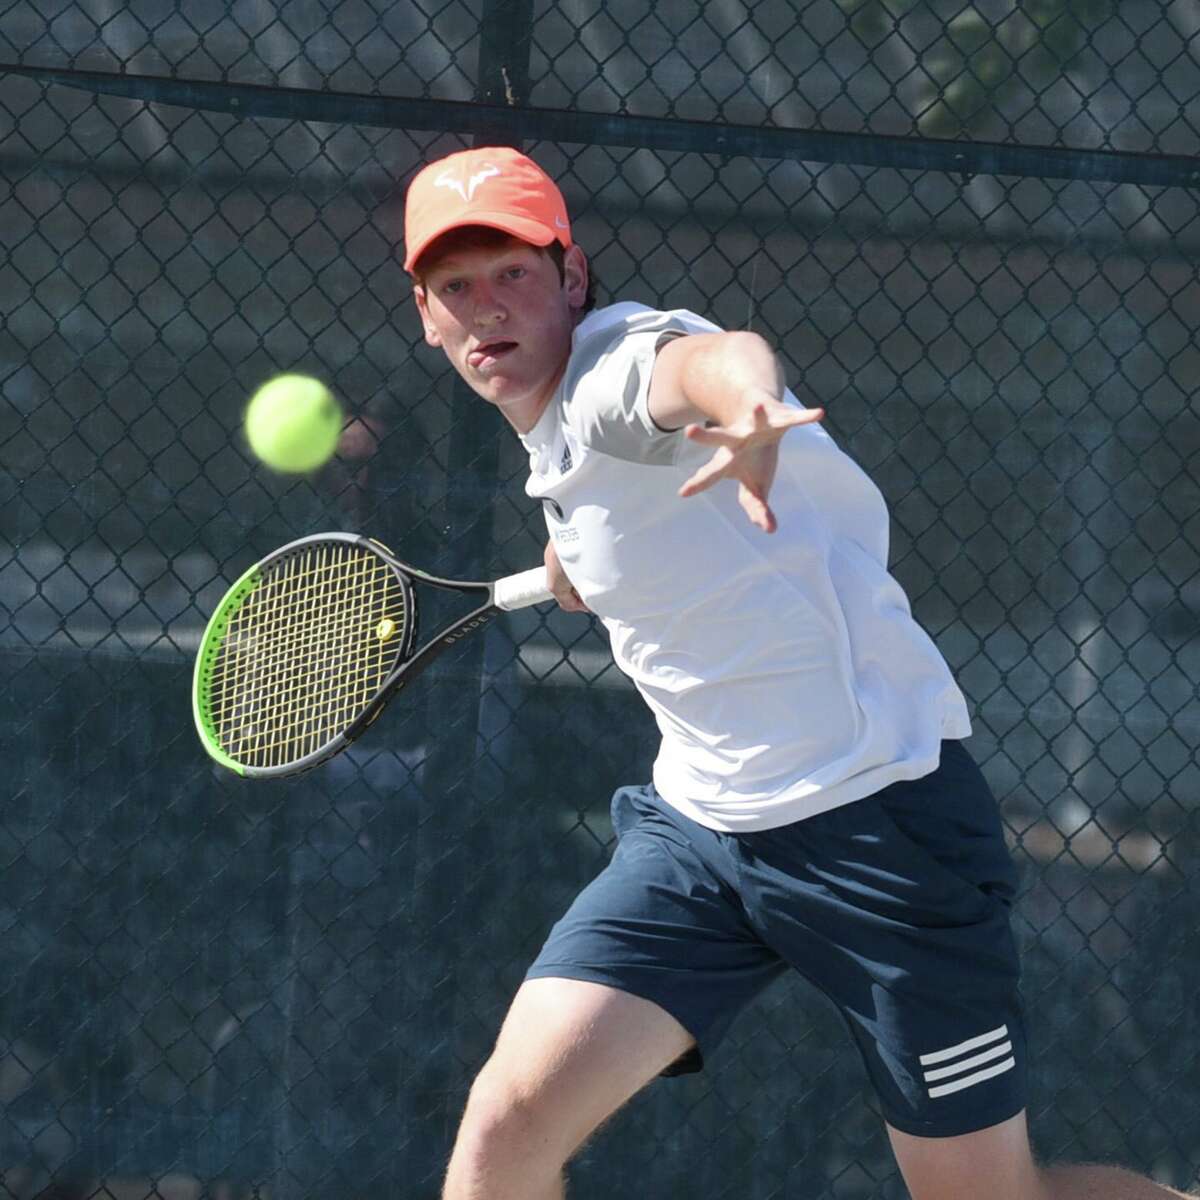 Staples' Tighe Brunetti lines up a shot against Darien's Chris Calderwood at No. 1 singles during the FCIAC boys tennis final in Wilton on Tuesday, May 25, 2021.